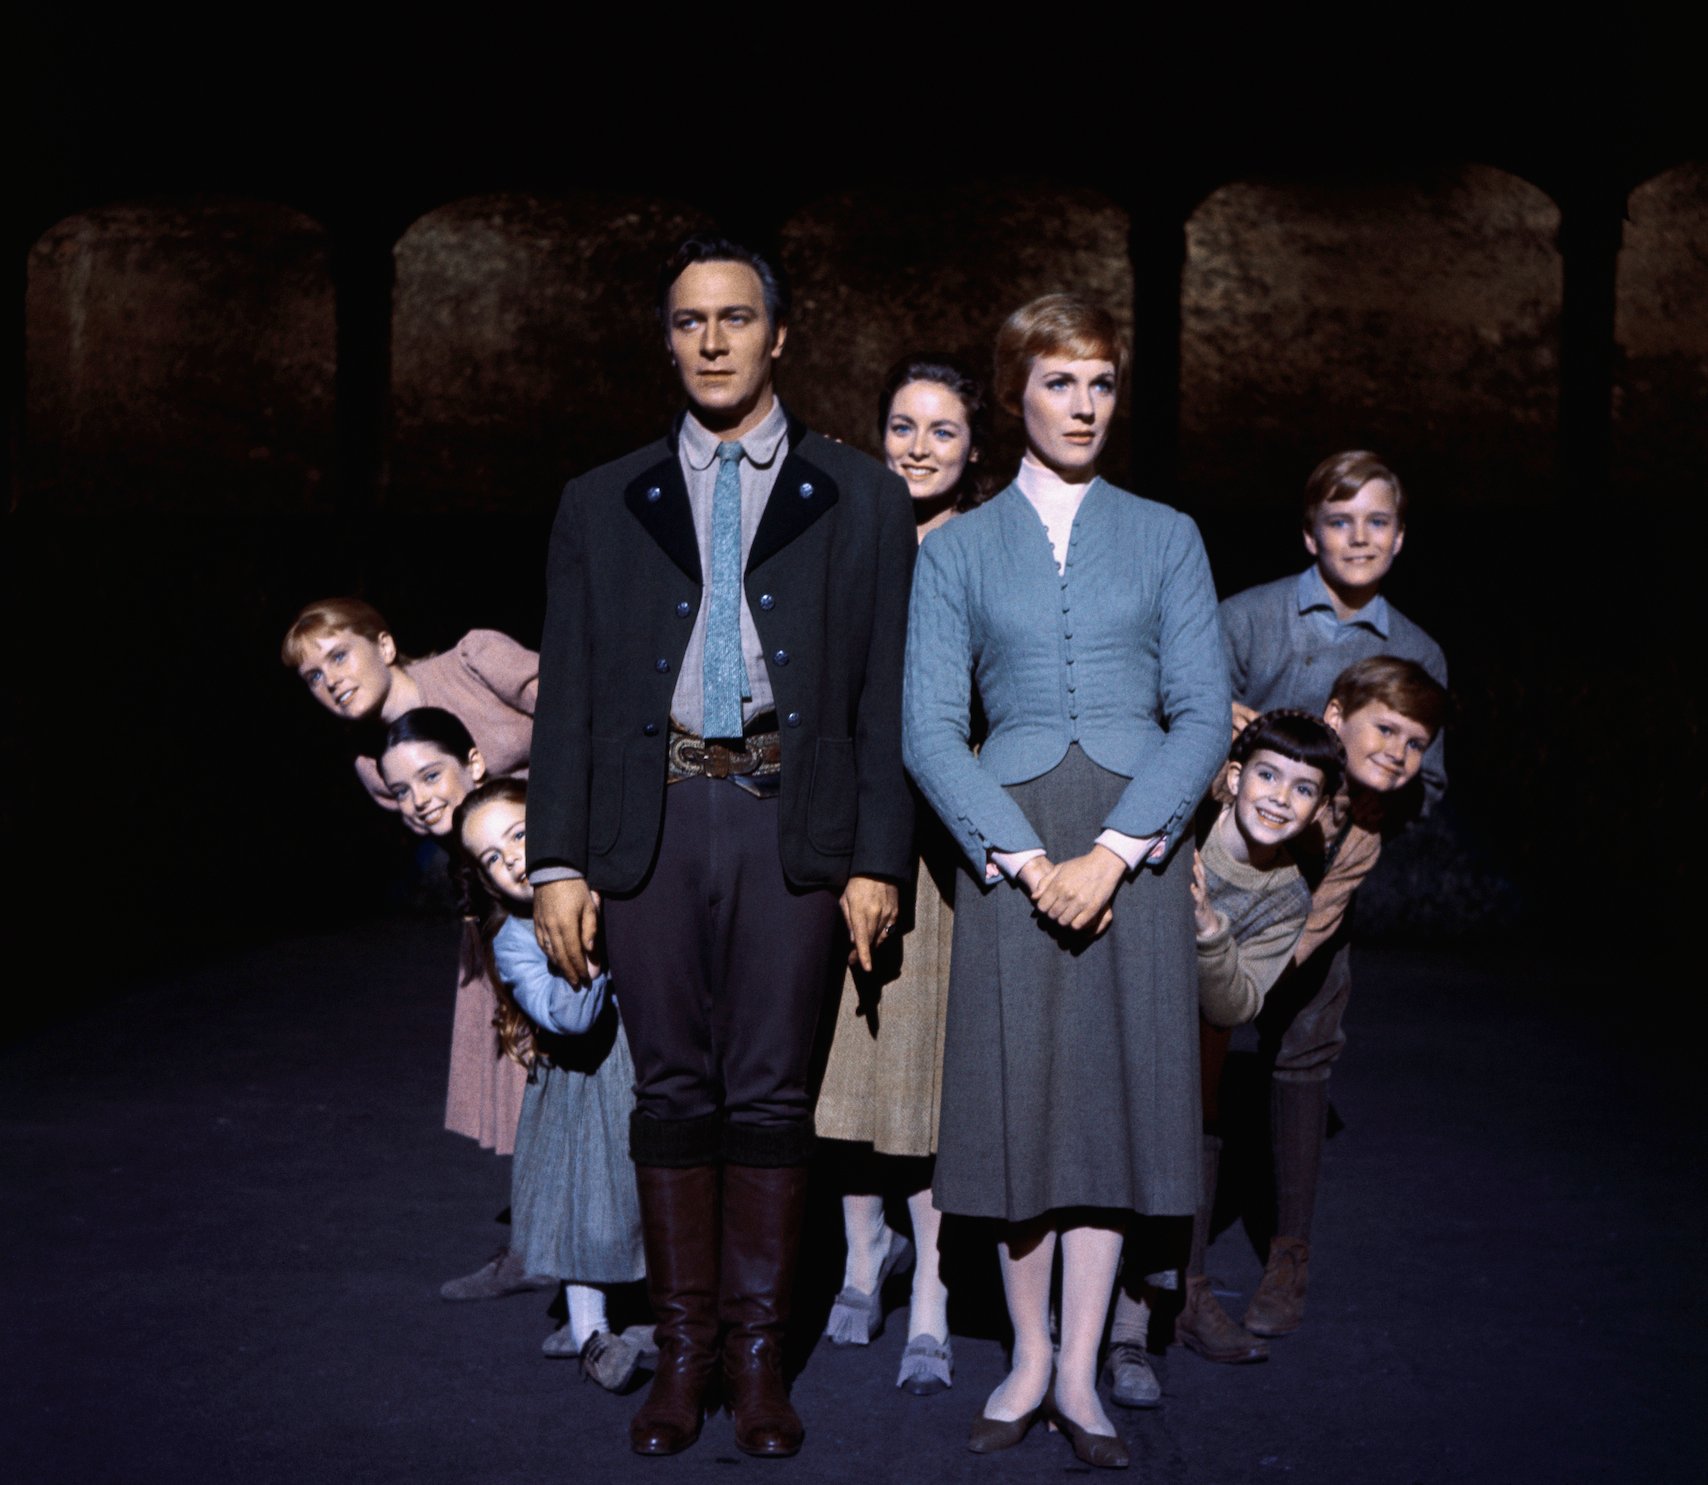 Julie Andrews and Christopher Plummer along with the children from 'The Sound of Music' cast